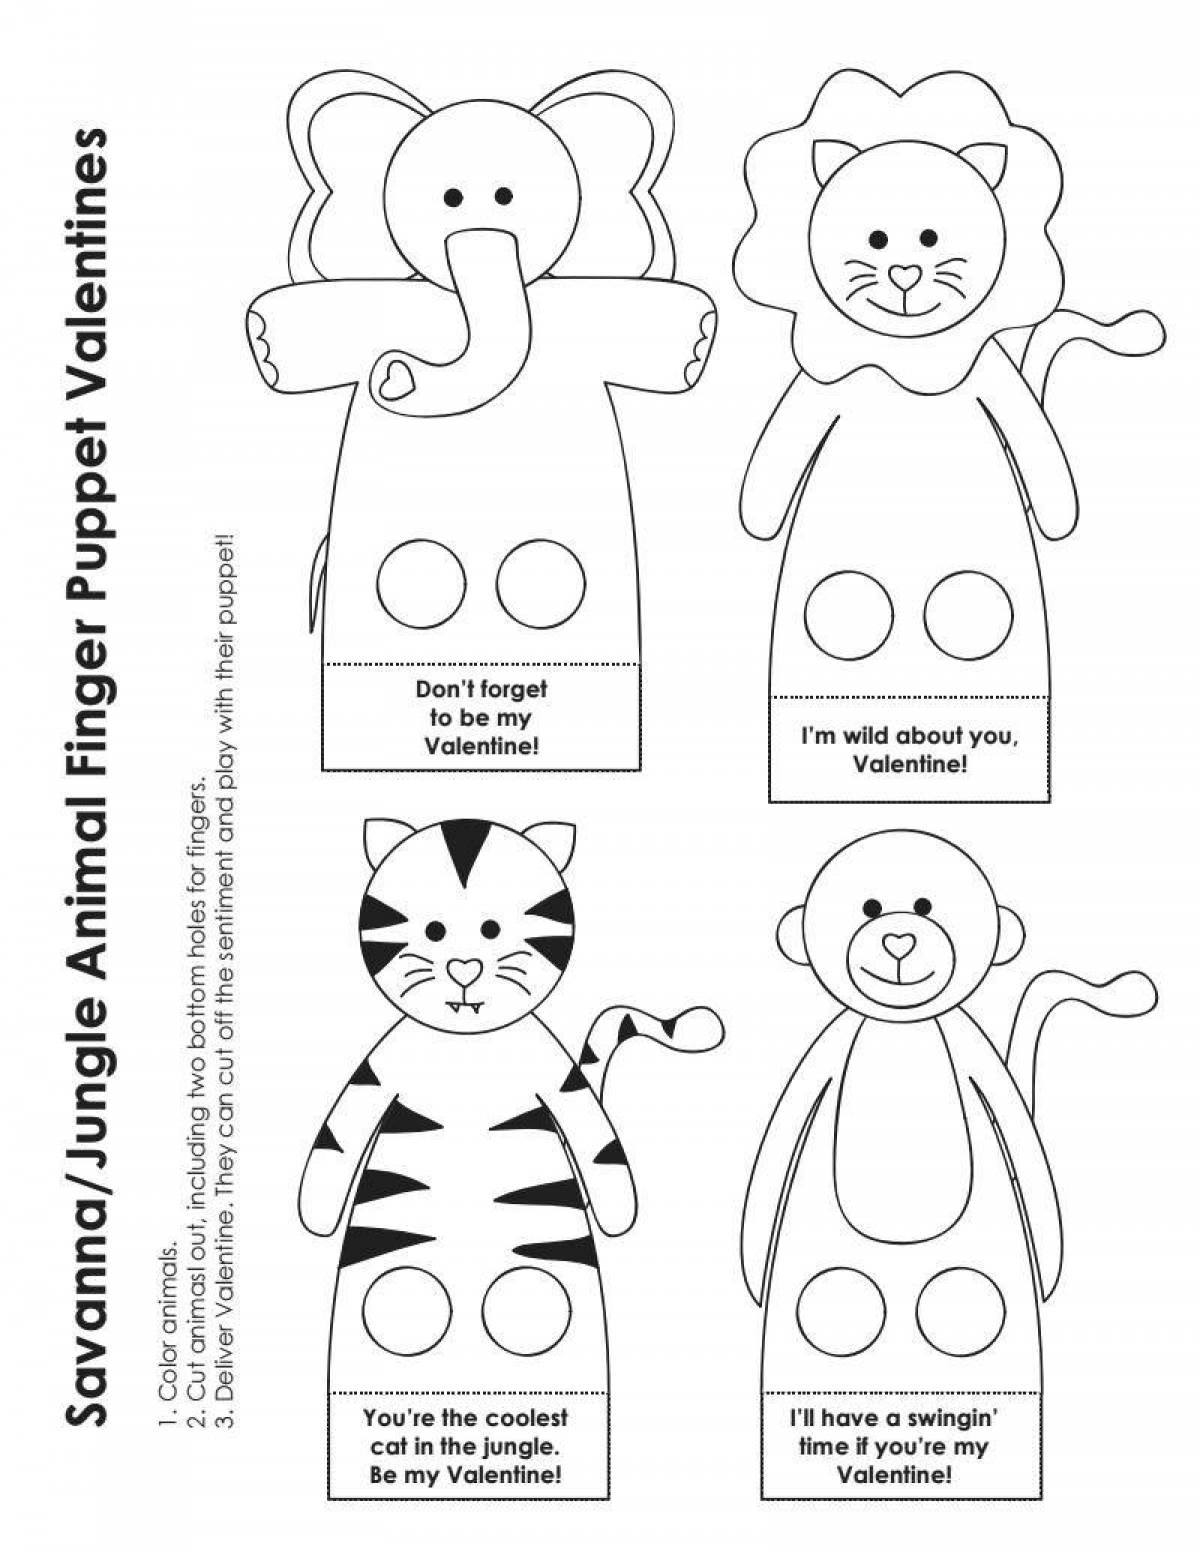 Color-mania finger theater coloring page